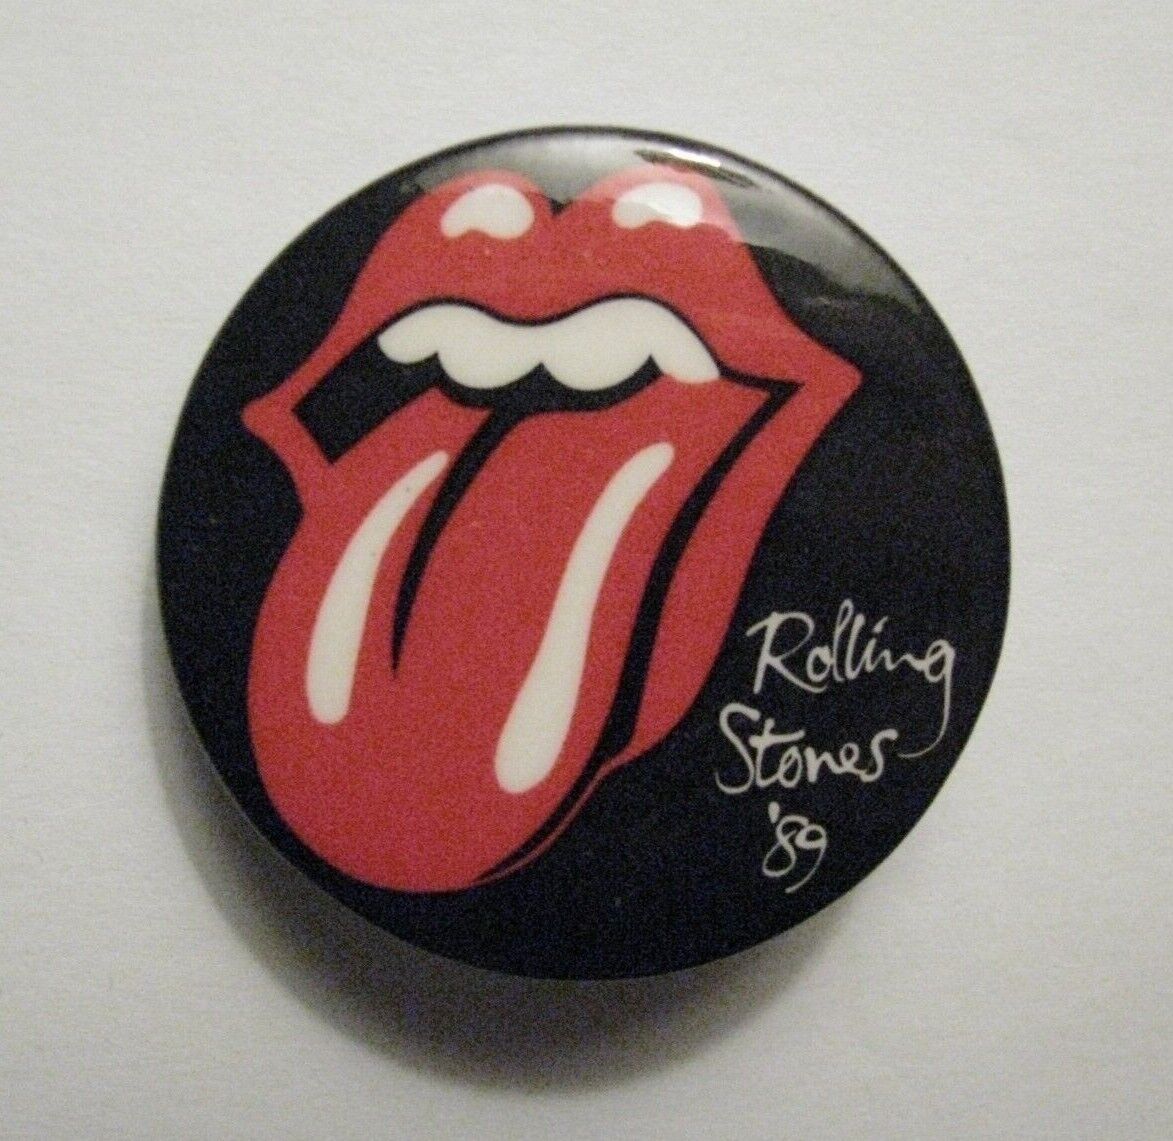 *ROLLING STONES ’89 PROMO PINBACK BUTTON BADGE – MICK JAGGER – KEITH RICHARDS*